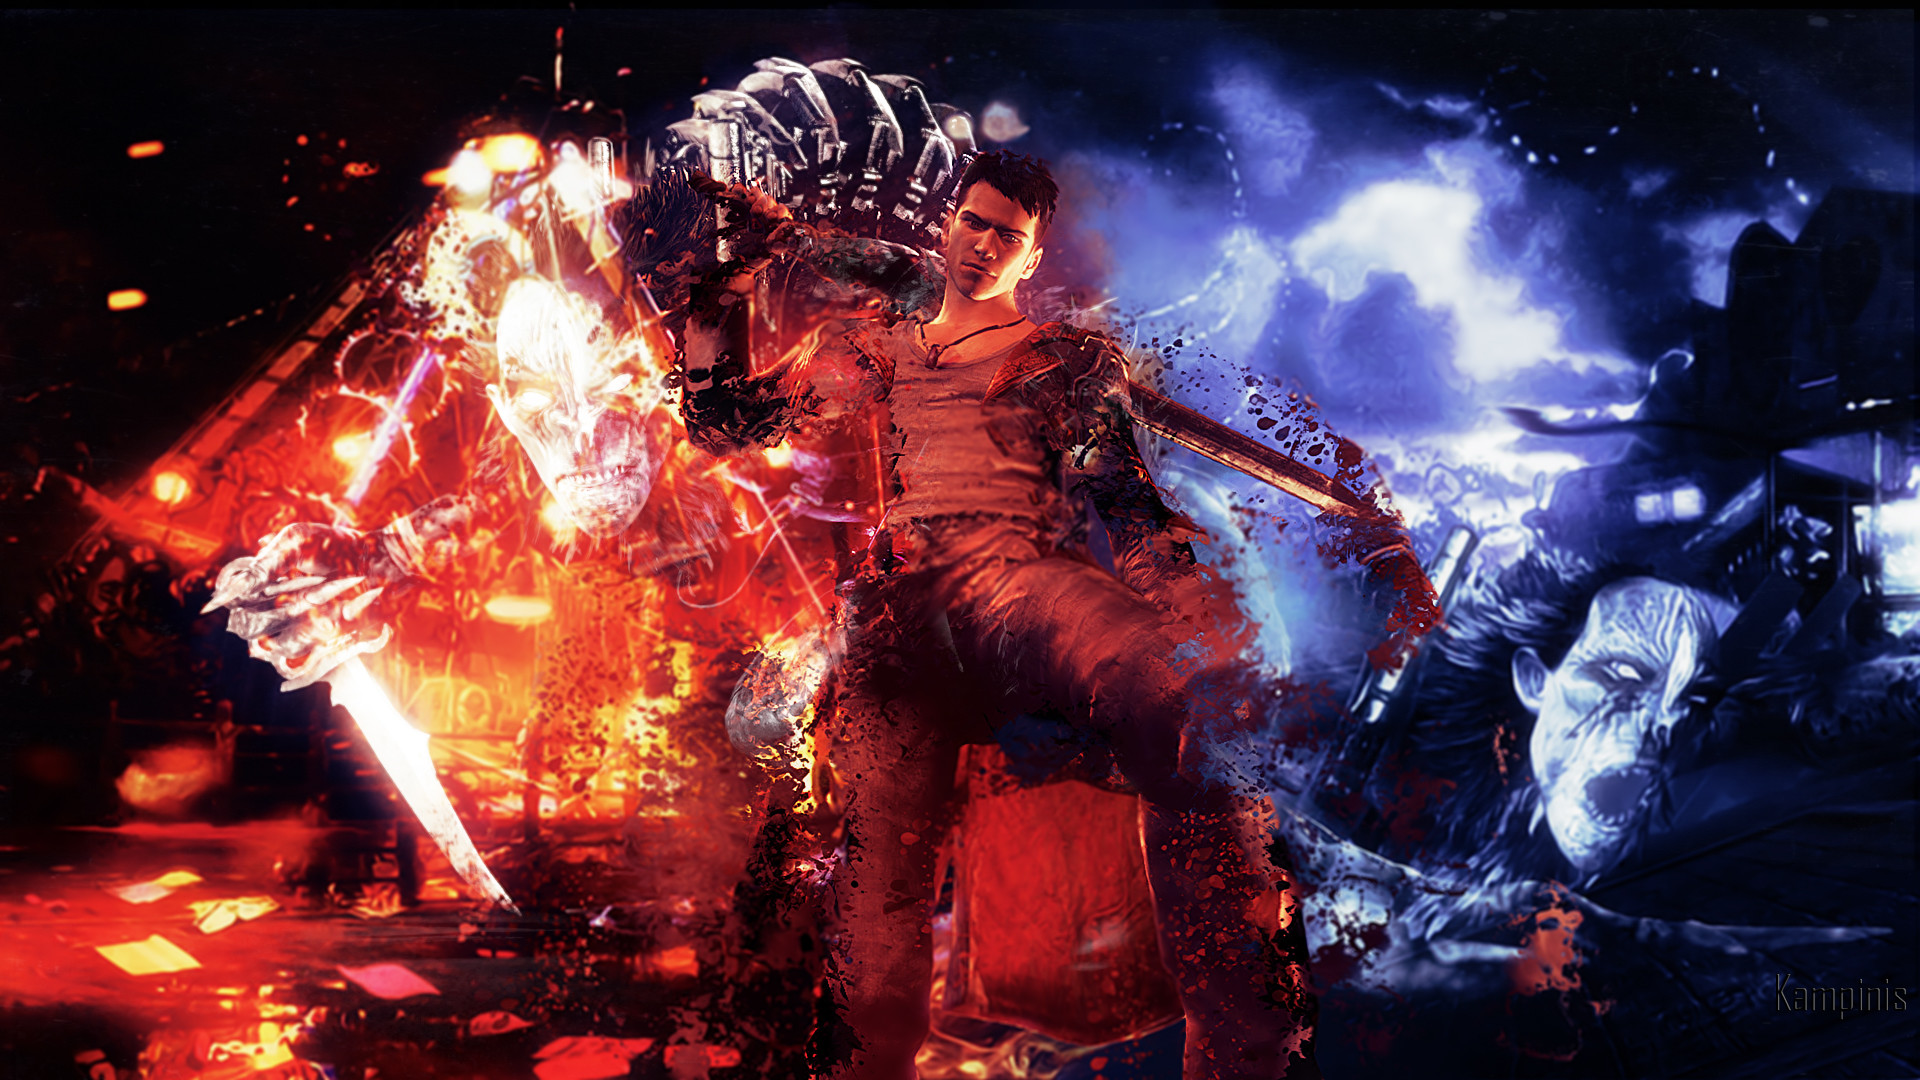 1920x1080 ... DmC: Devil May Cry Dante and The Hunter by kampinis